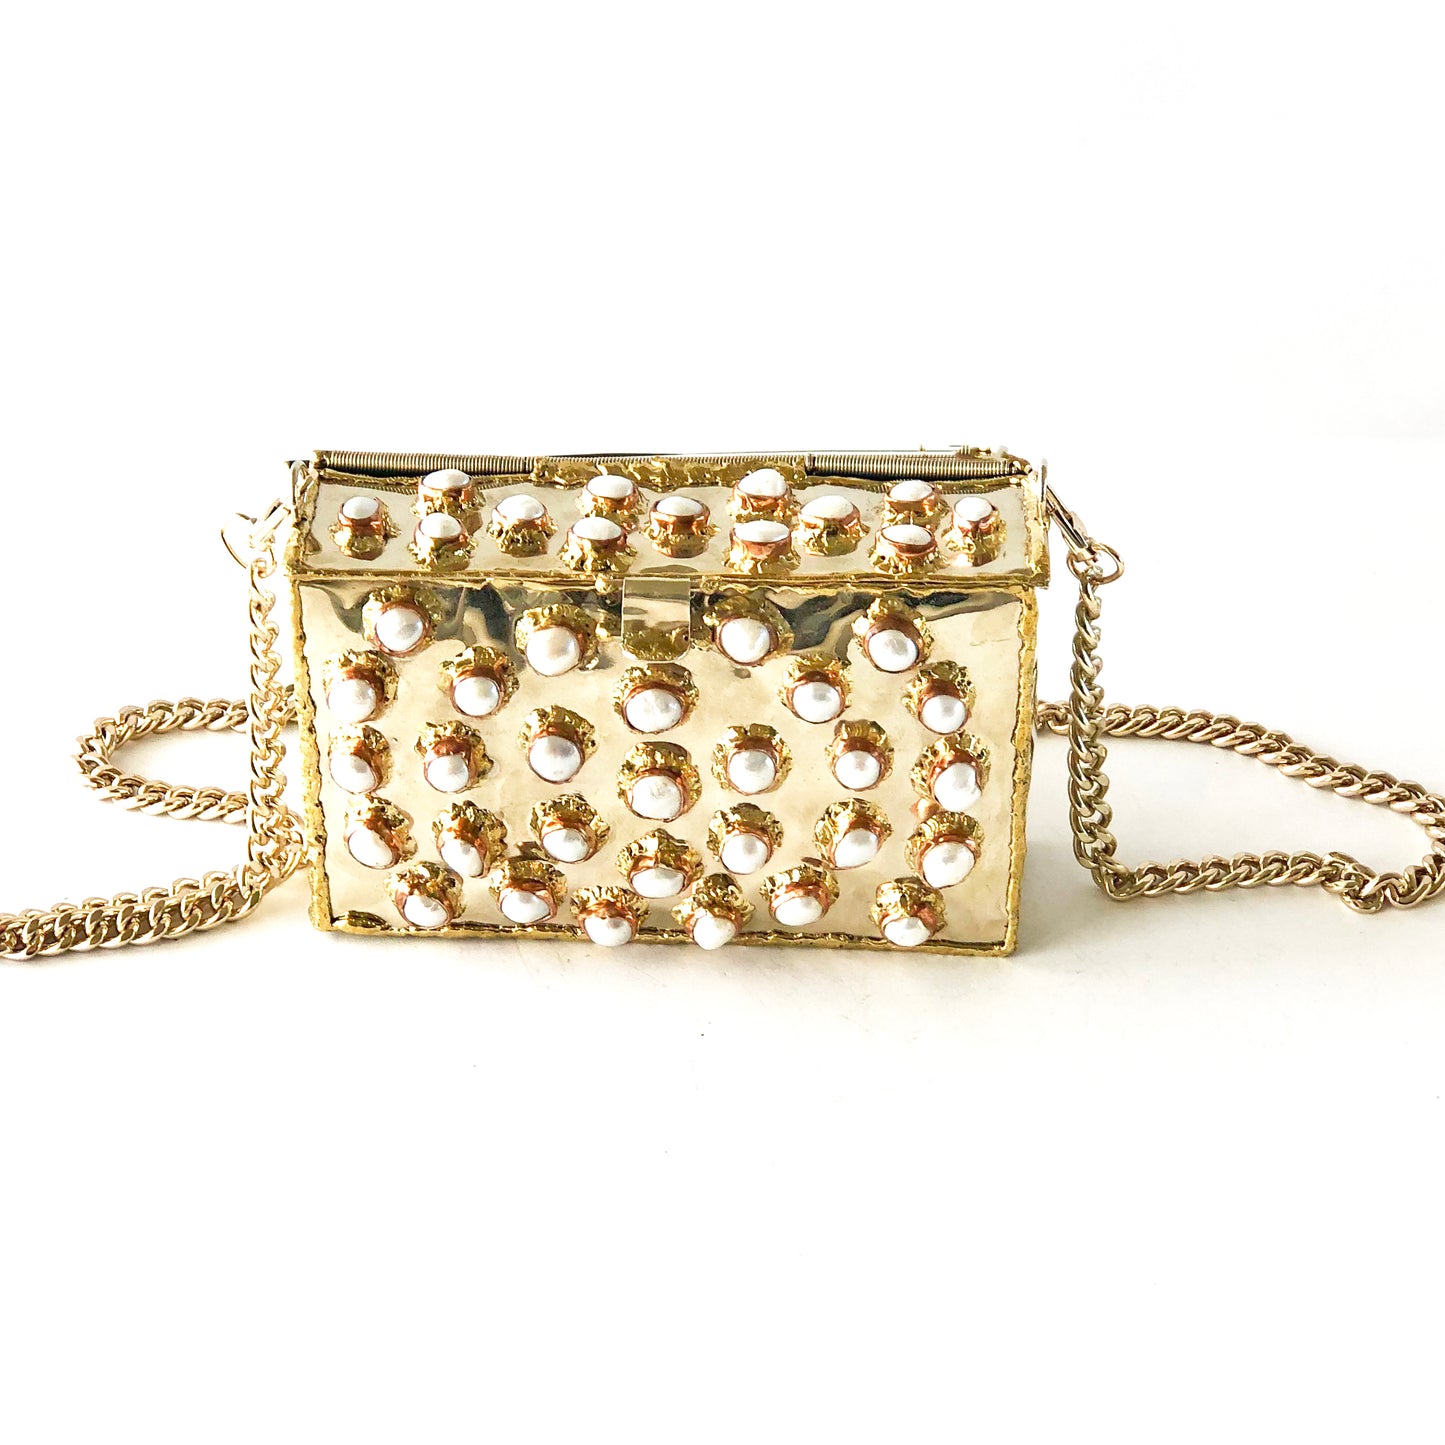 Handcrafted luxury pearls bag